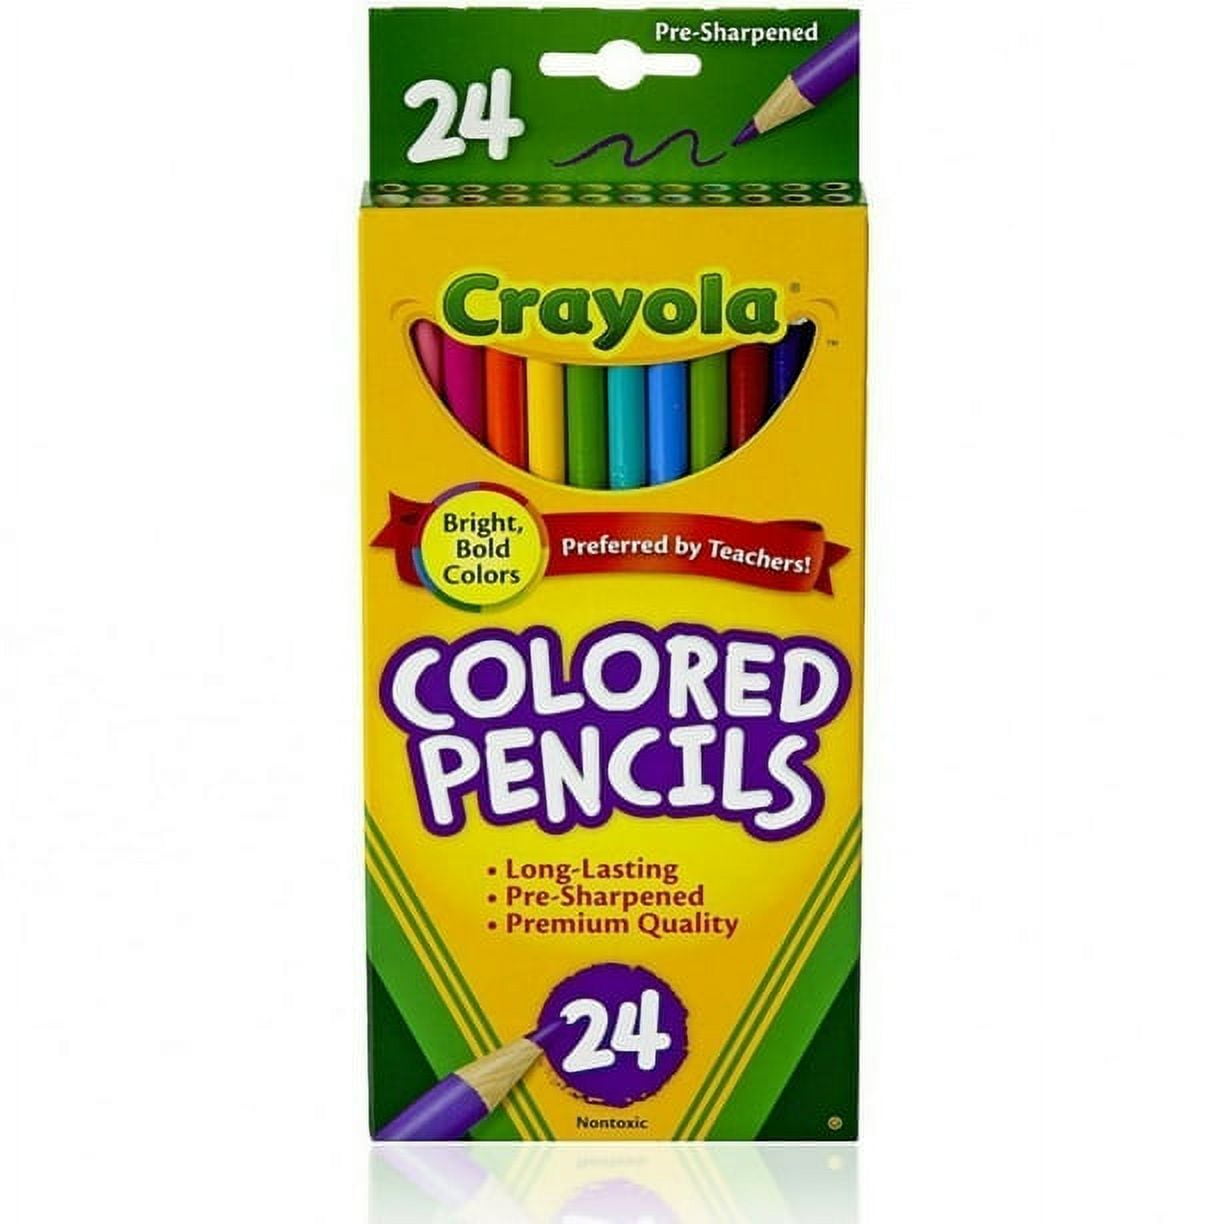 Trail maker Colored Pencils Bulk 100 Packs for Classrooms, Artists, Kids,  Adult Coloring, Colored Pencils in Bulk